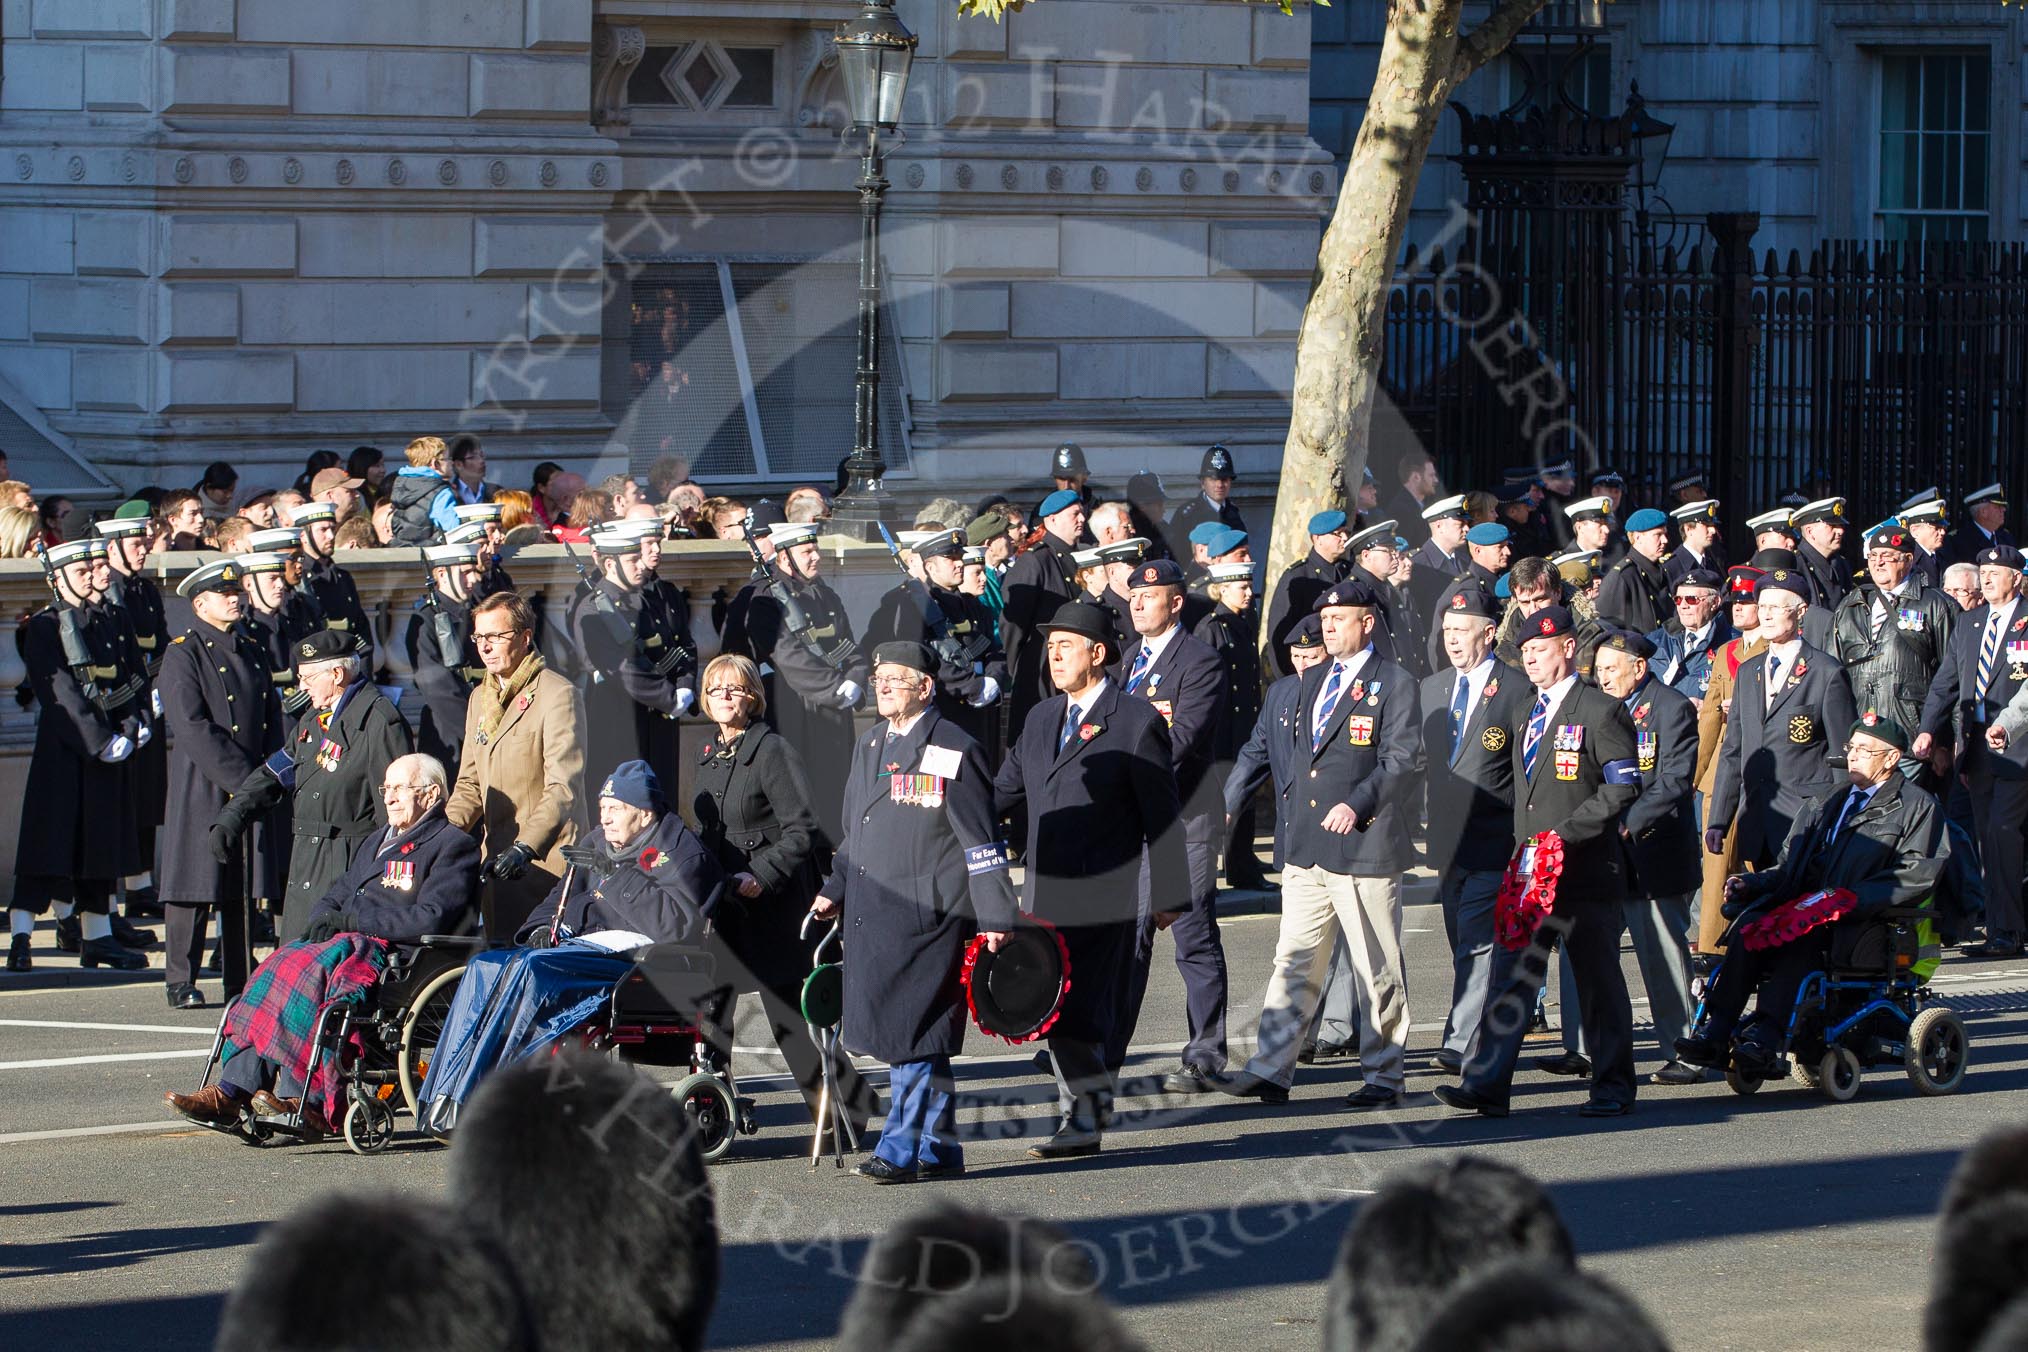 Remembrance Sunday 2012 Cenotaph March Past: Group F18 - Far East Prisoners of War and F19 - British Veterans Group..
Whitehall, Cenotaph,
London SW1,

United Kingdom,
on 11 November 2012 at 11:48, image #545